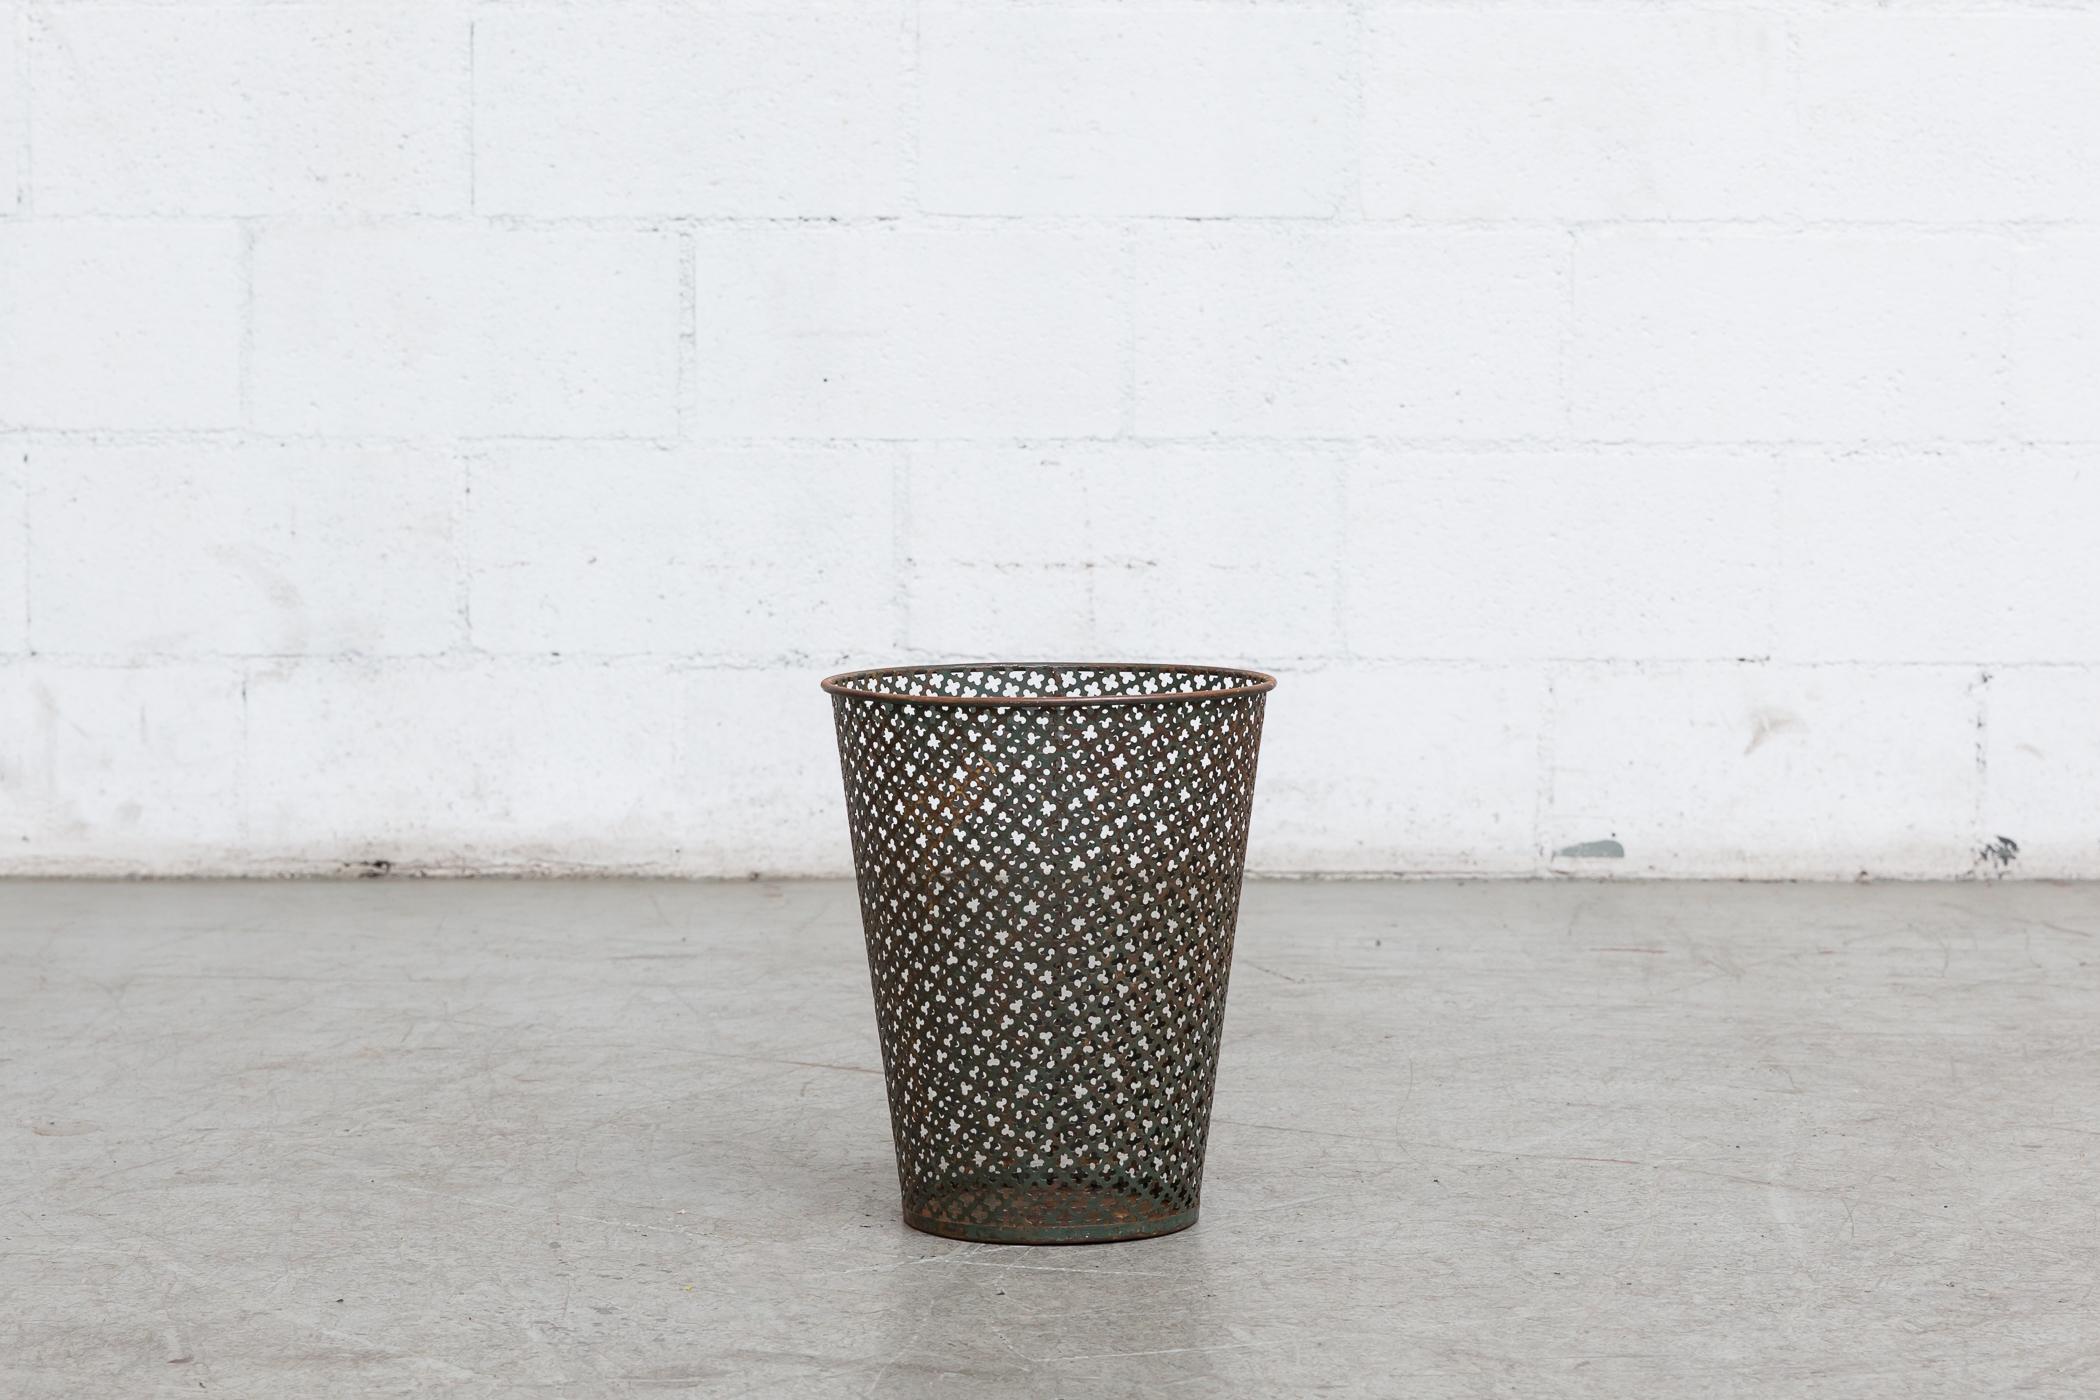 Attributed to Mathieu Matégot waste basket manufactured by Artimeta, Netherlands. Visible wear with visible enamel loss. Beautiful patina. Varying conditions.